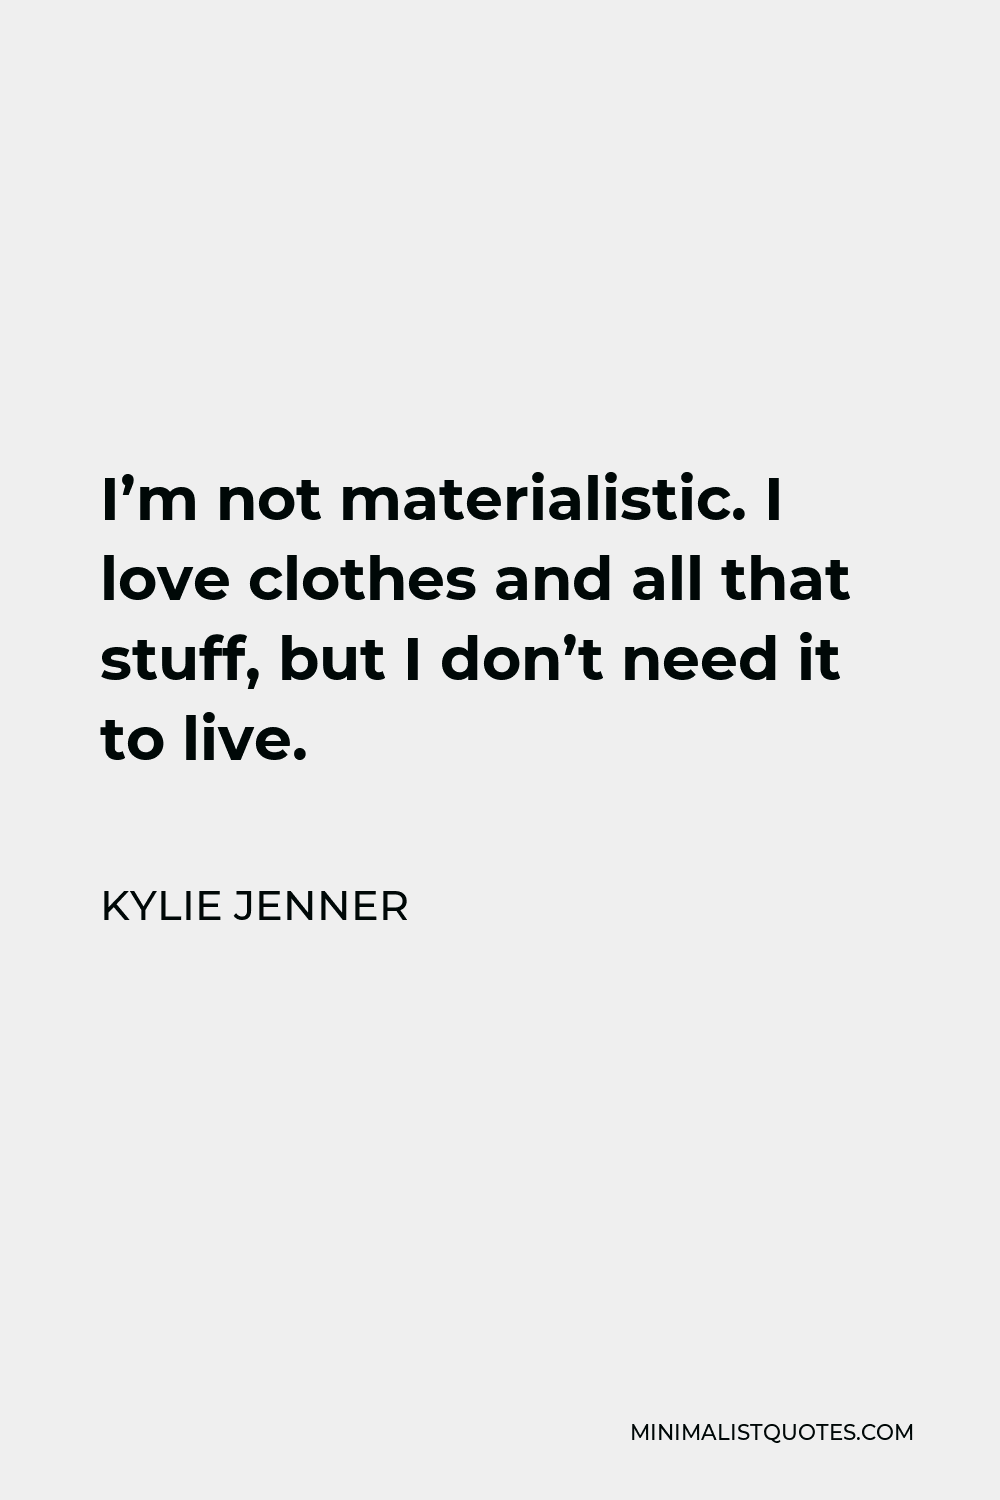 Kylie Jenner Quote - I’m not materialistic. I love clothes and all that stuff, but I don’t need it to live.